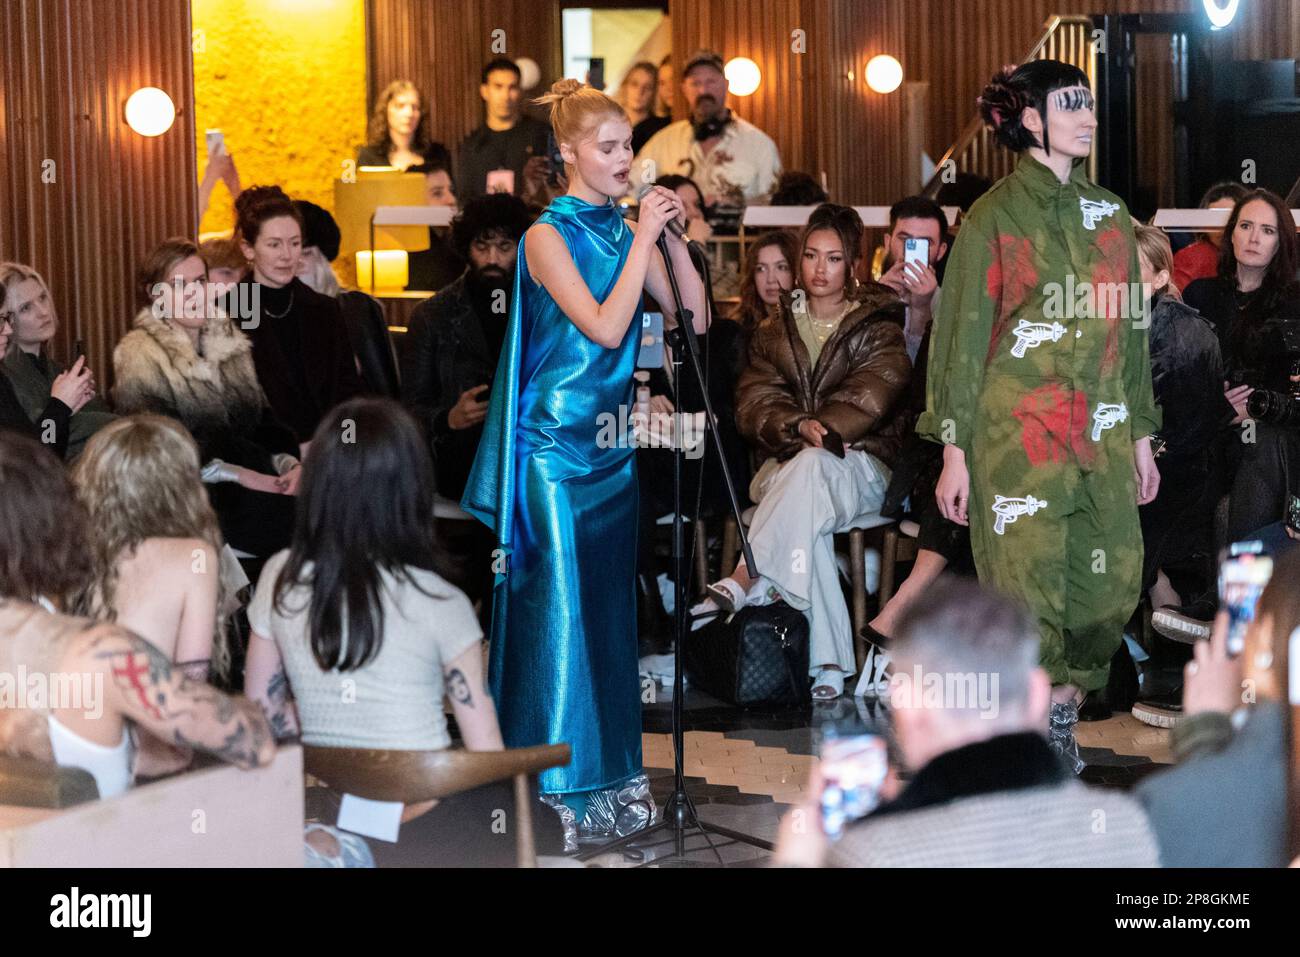 VIN+OMI fashion show in collaboration with King Charles III, creating fashion from recycling. Megan Rutherford singing during event in 100 Shoreditch Stock Photo